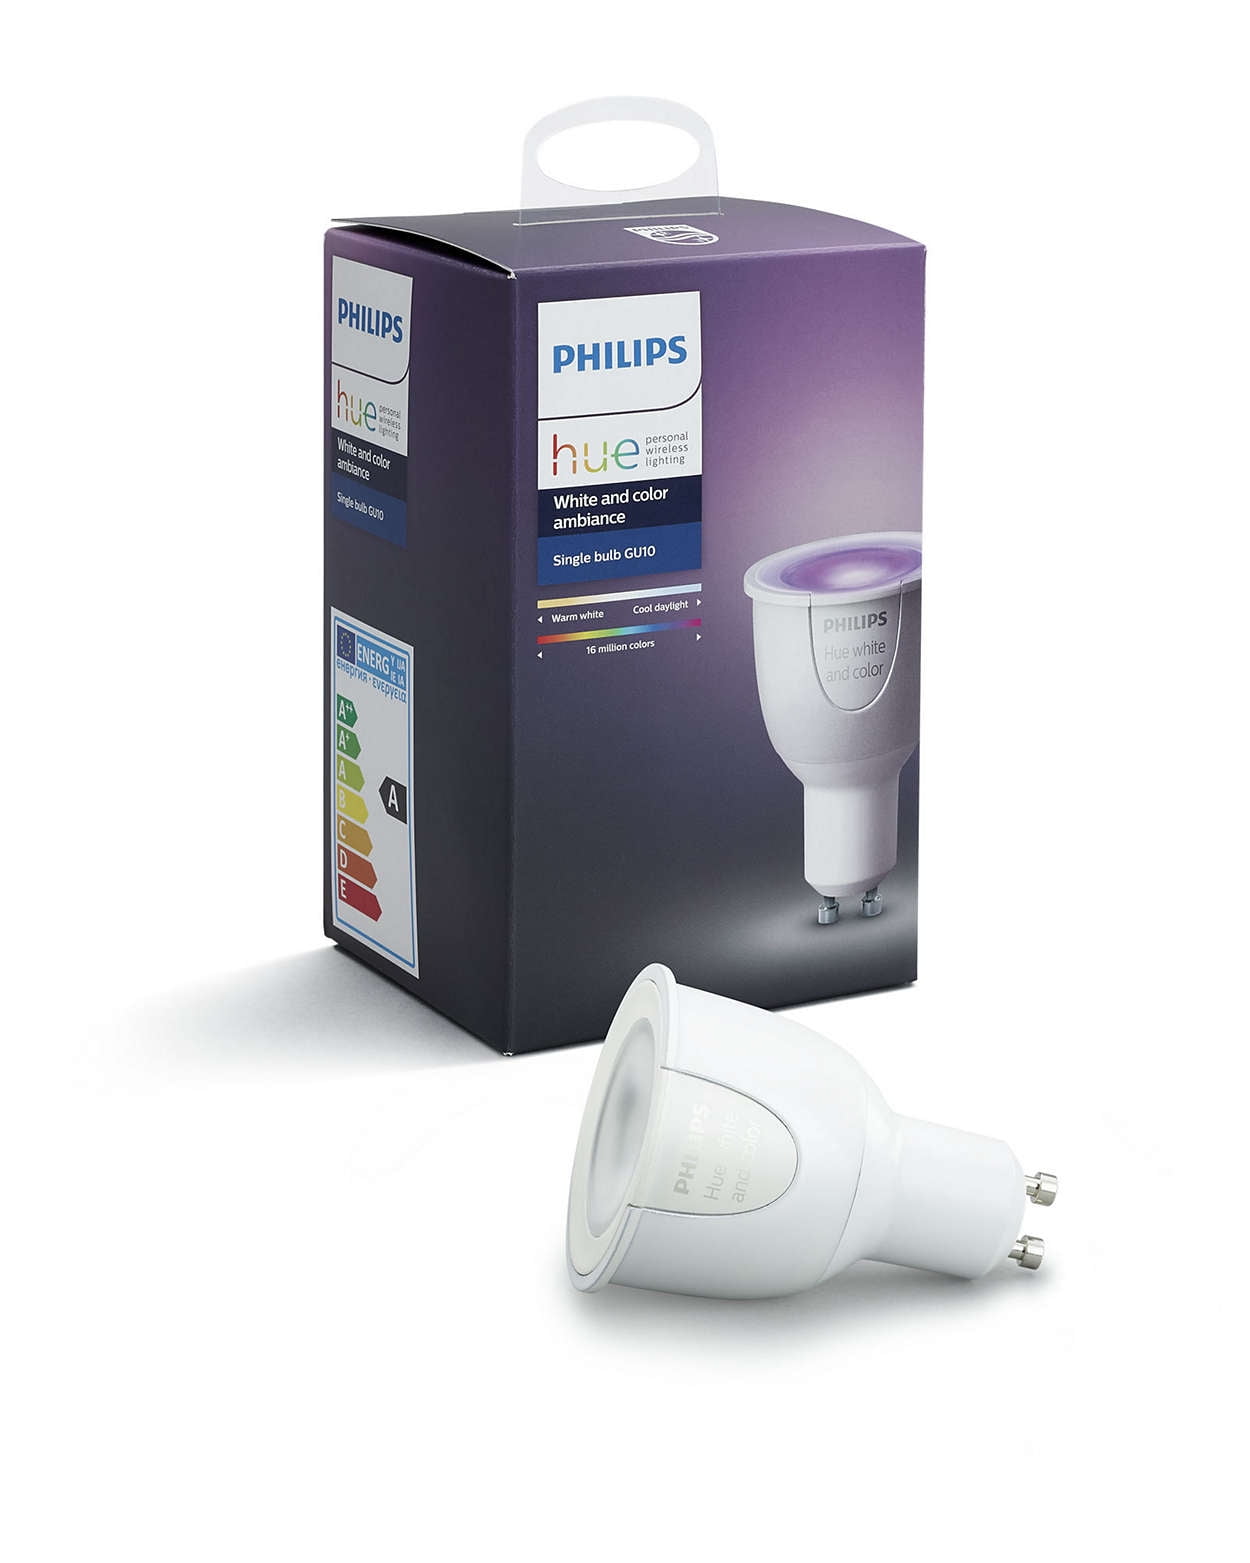 Philips Hue White and Color Ambiance Bulb, 60W 1-Pack - Walmart.com